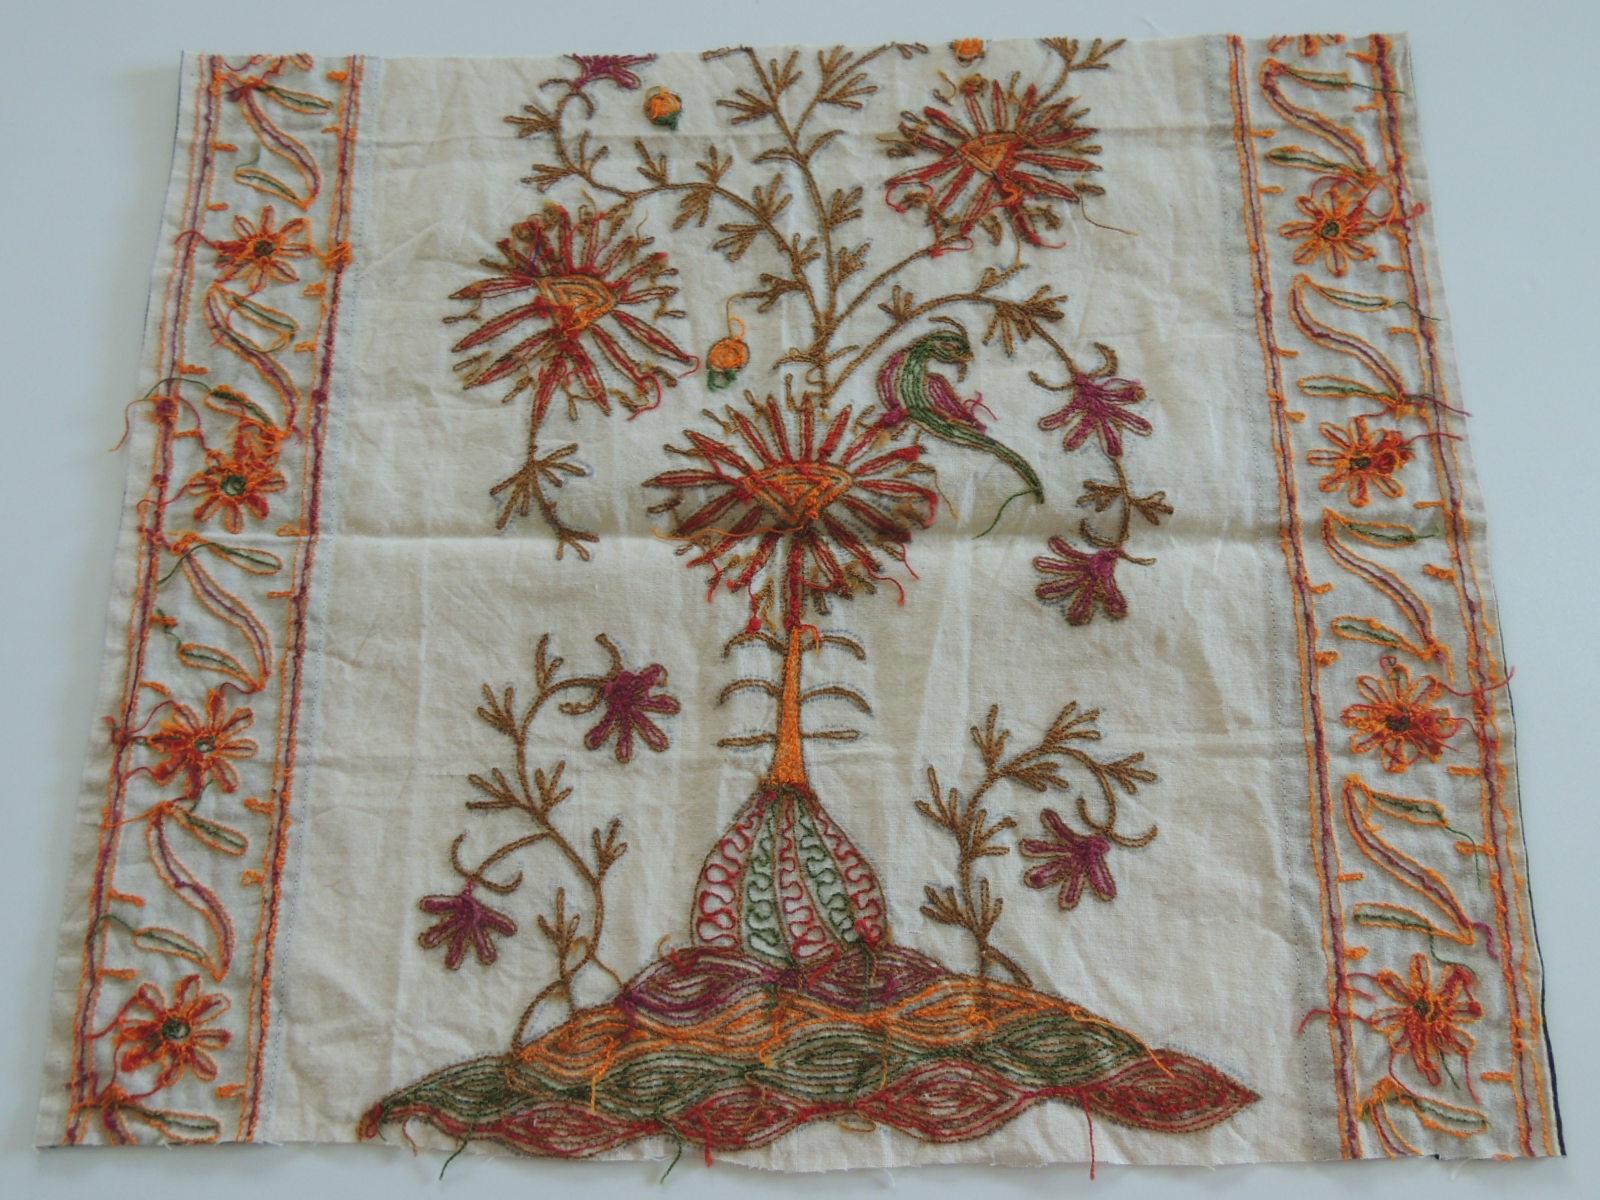 Hand-Crafted Vintage Embroidered Orange and Green Indian Textile